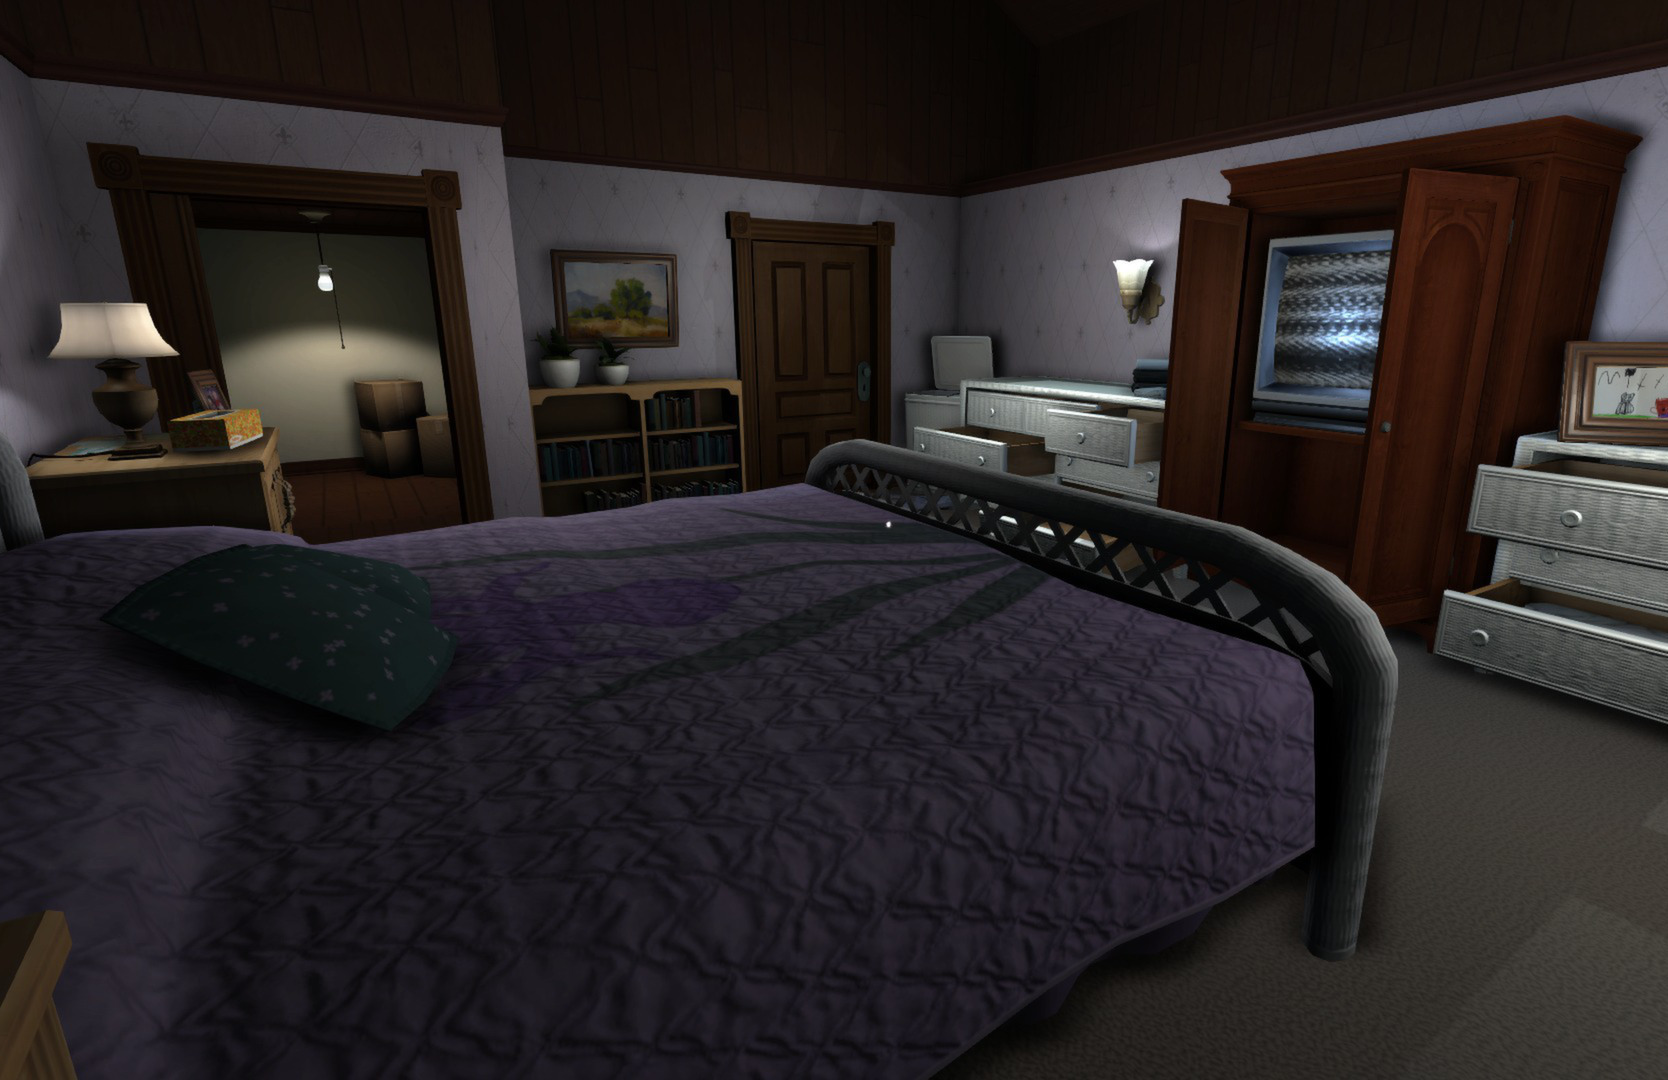 gone home free download mac